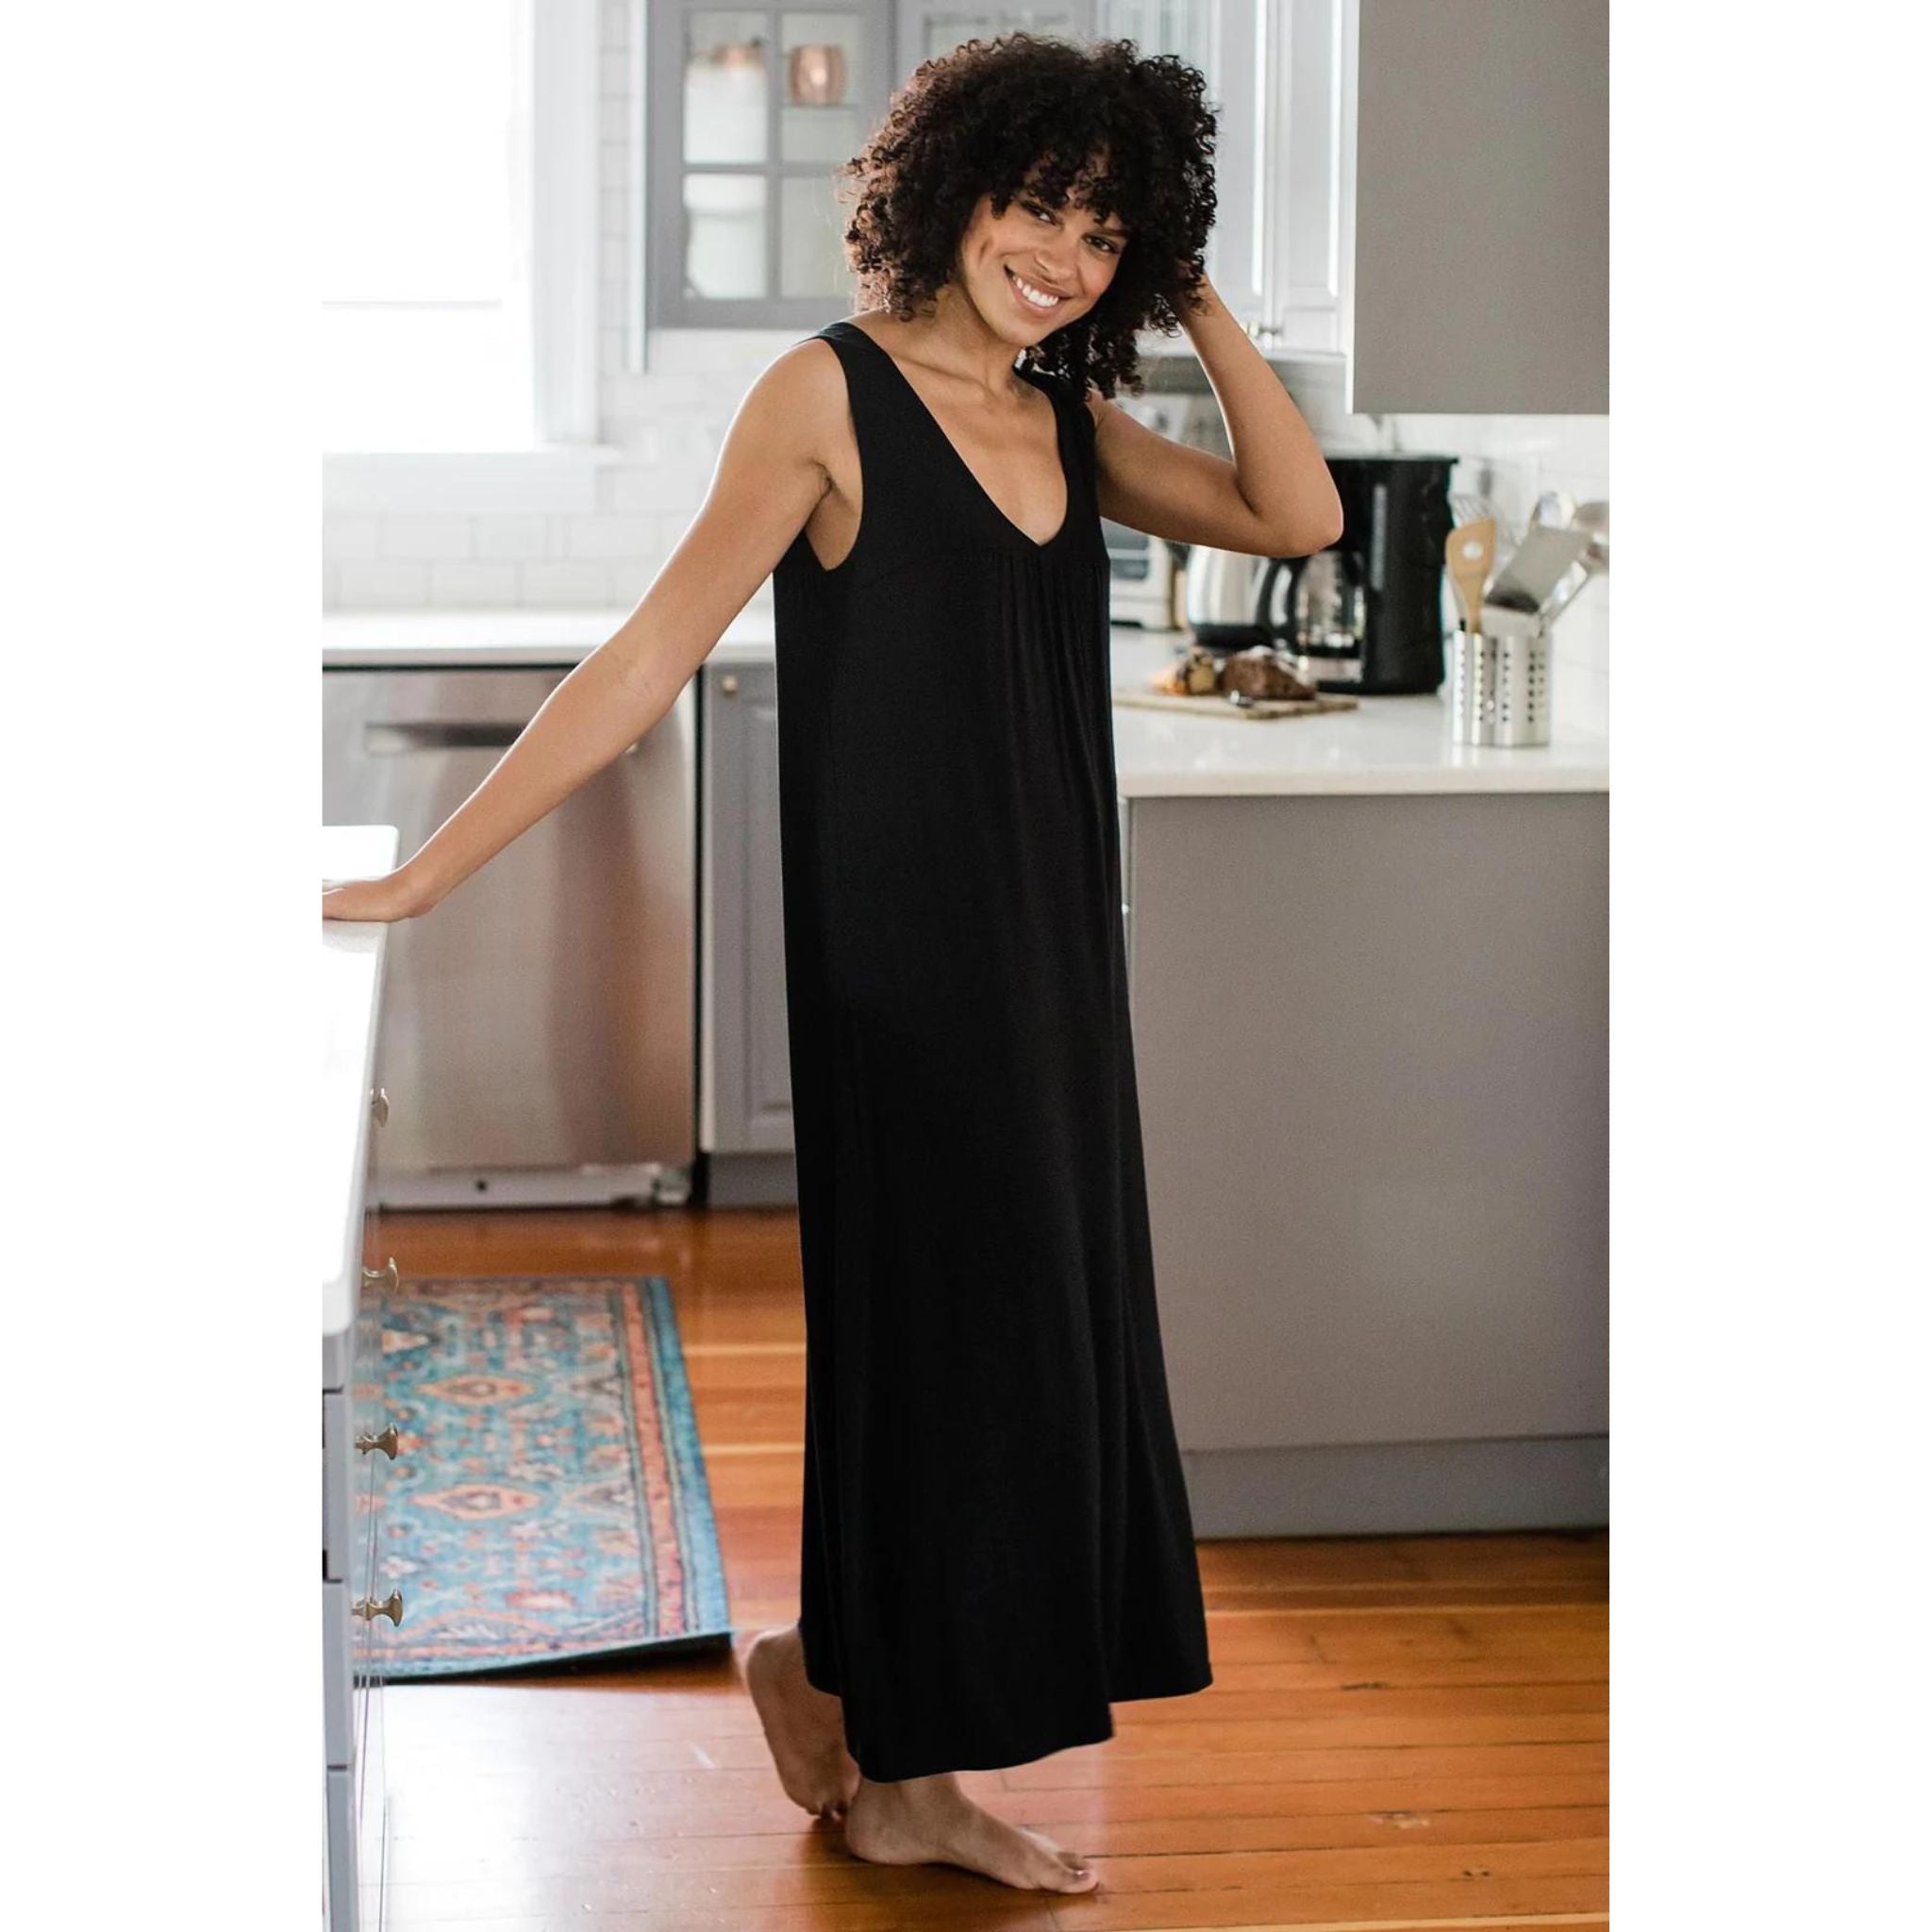 True to all YALA sleepwear, the Molly Nightgown boasts a sensual drape and movement with simple lines. This deep V-neck, sleeveless gown descends to mid-calf. FABRIC: ORGANICALLY GROWN BAMBOO VISCOSE JERSEY Like a second skin, our bamboo viscose jersey provides incredible softness, breathability, and sun protection.  95% Viscose from Bamboo | 5% Spandex Sewn Where Sourced on Small Sewing Floors Low Impact Dyes Oeko-Tex 100 Certified Naturally up to UPF 50 (Ultraviolet Protection Factor)